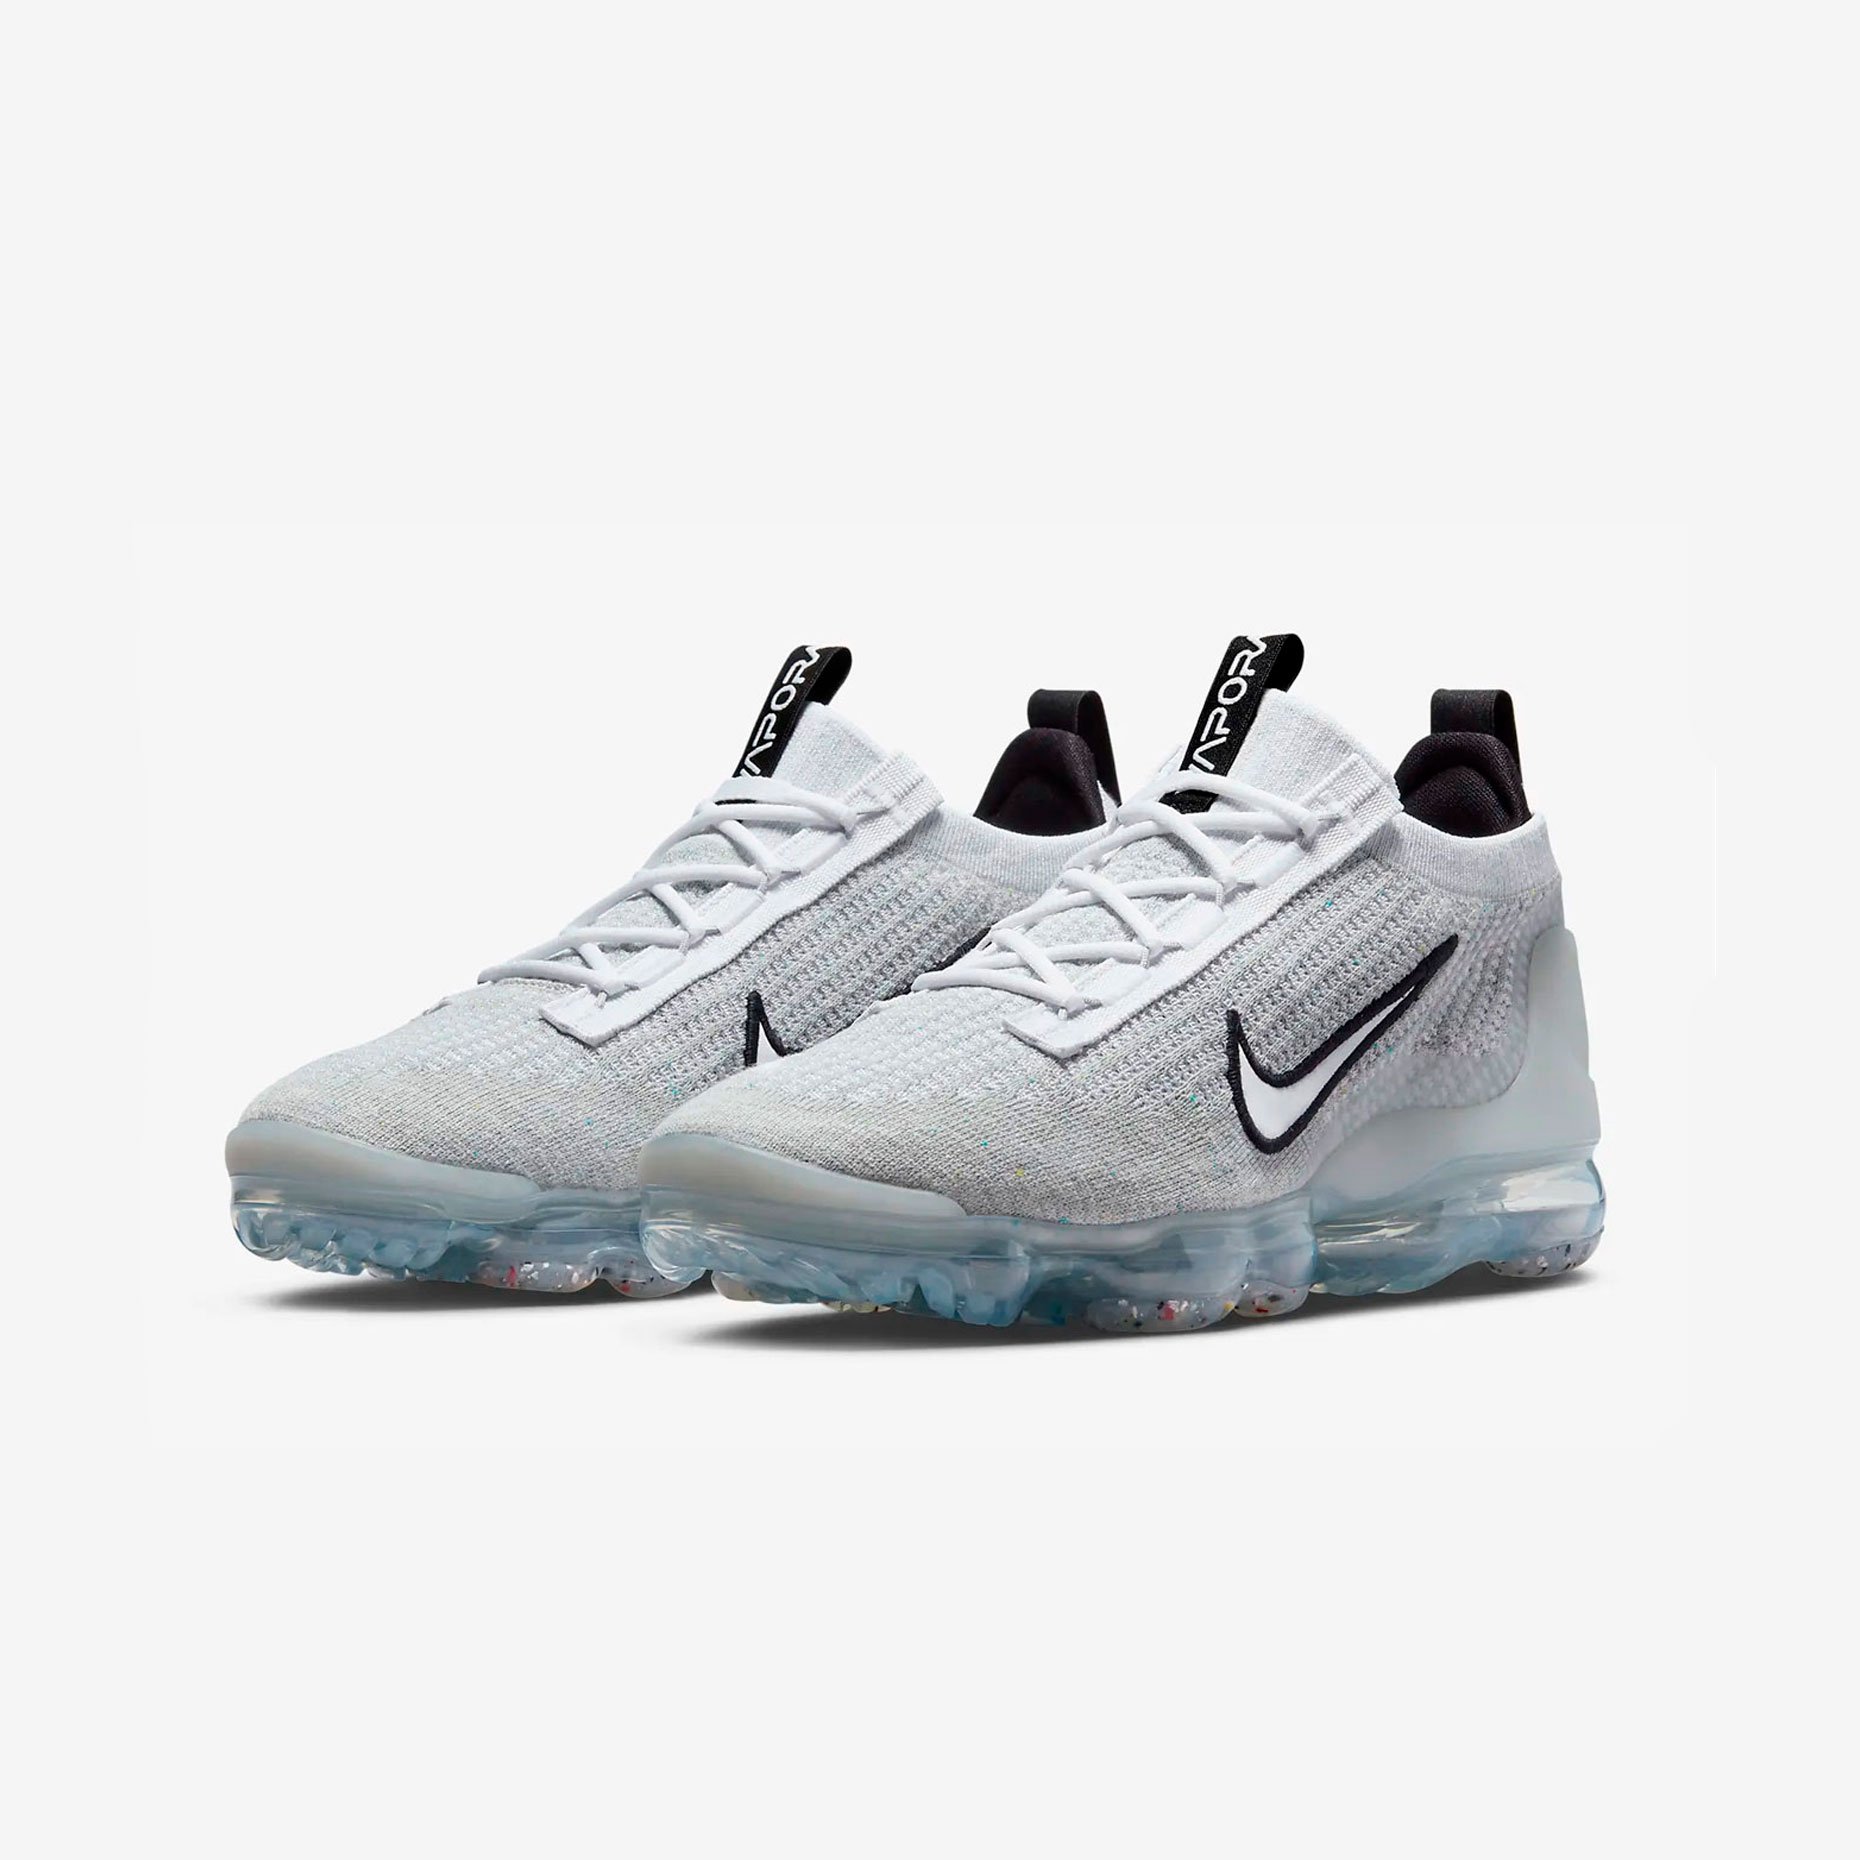 vapormax for 100